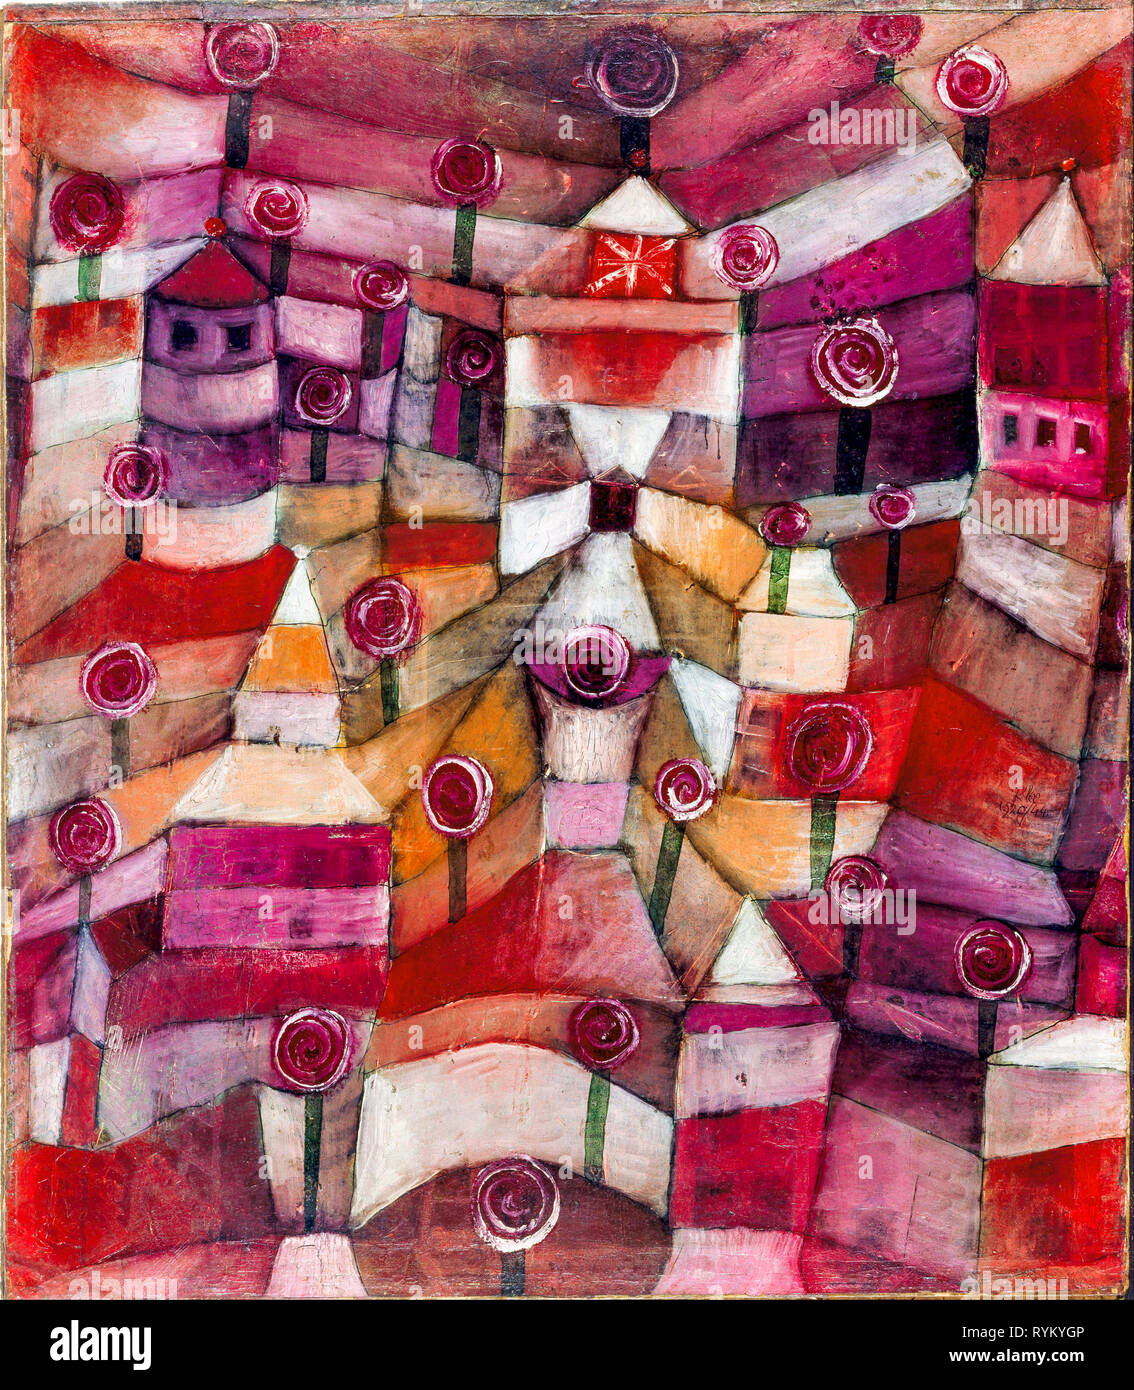 Paul Klee painting, Rose Garden, abstract painting, 1920 Stock Photo